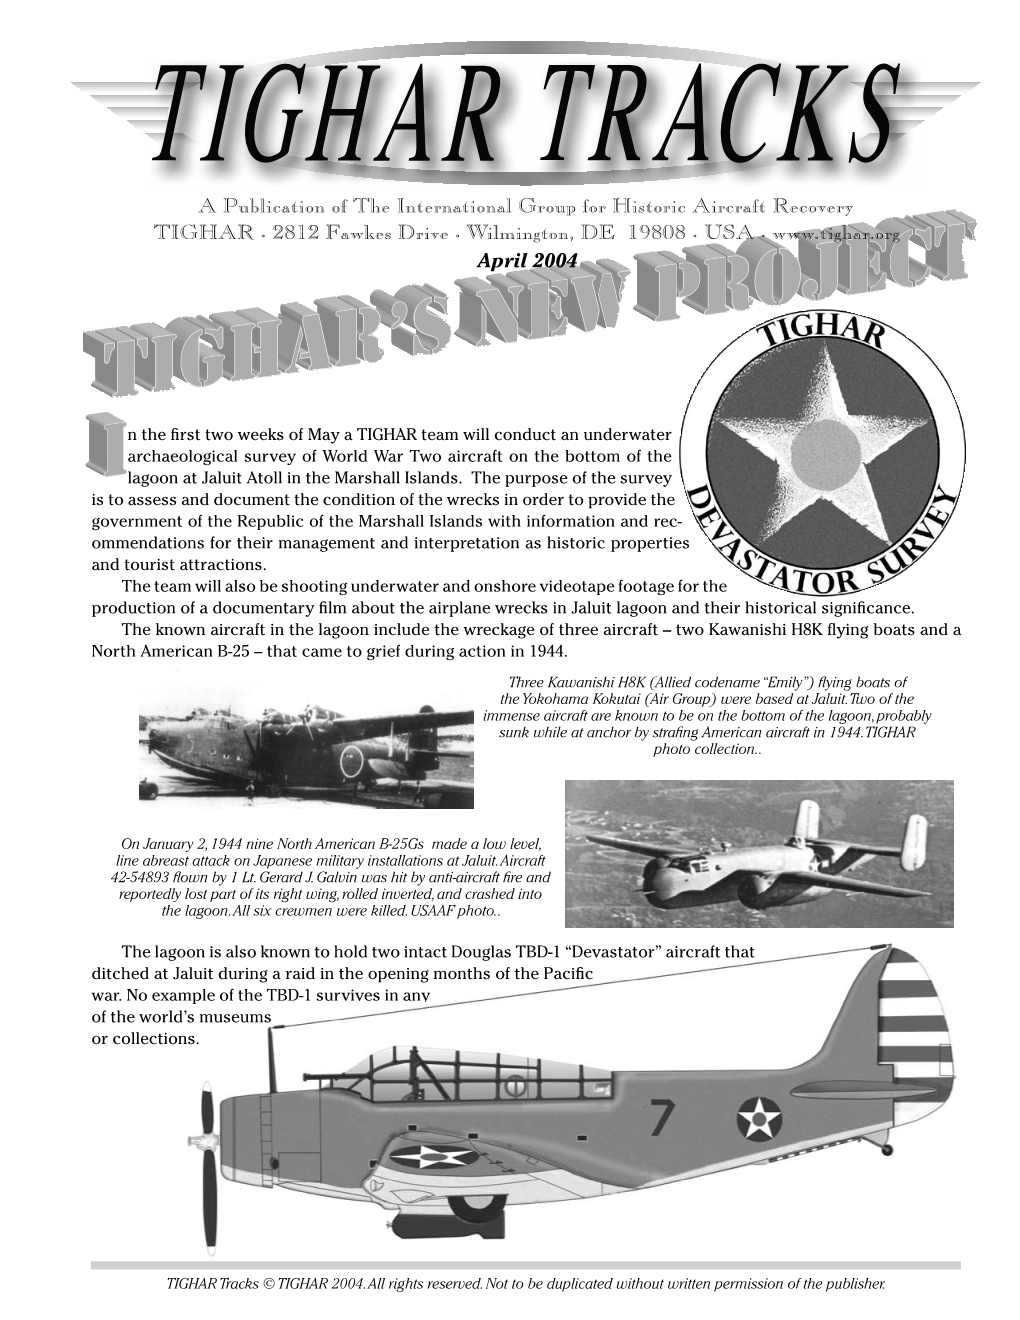 A Publication of the International Group for Historic Aircraft Recovery TIGHAR · 2812 Fawkes Drive · Wilmington, DE 19808 · USA · April 2004